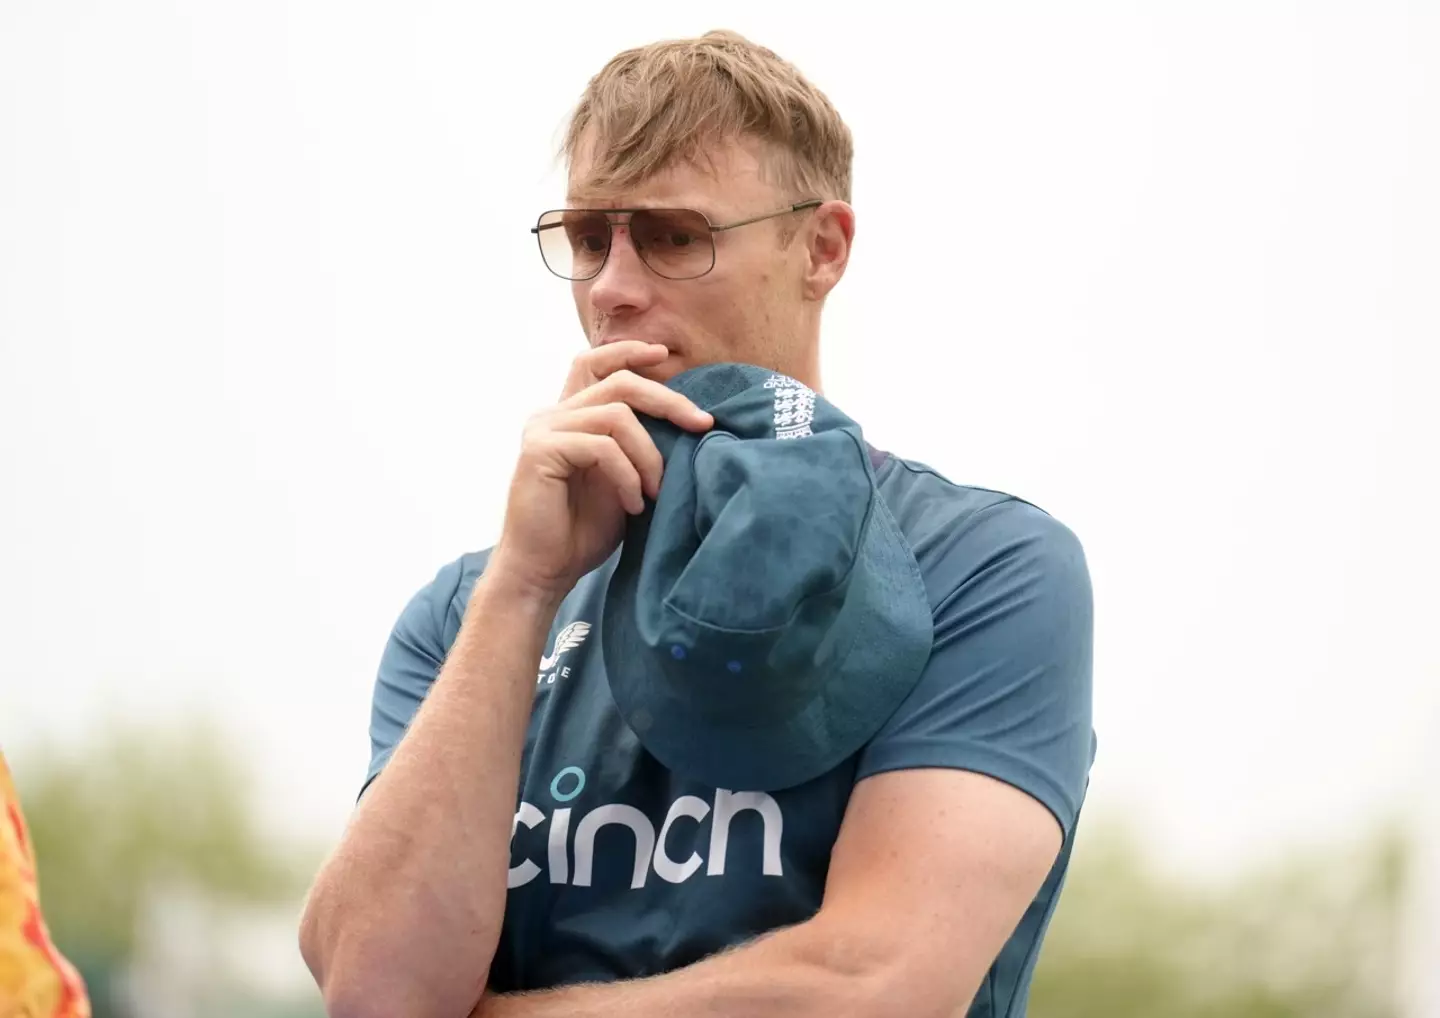 In September 2023, Flintoff was spotted out in public for the first time at a cricket game with visible scars and facial injuries.